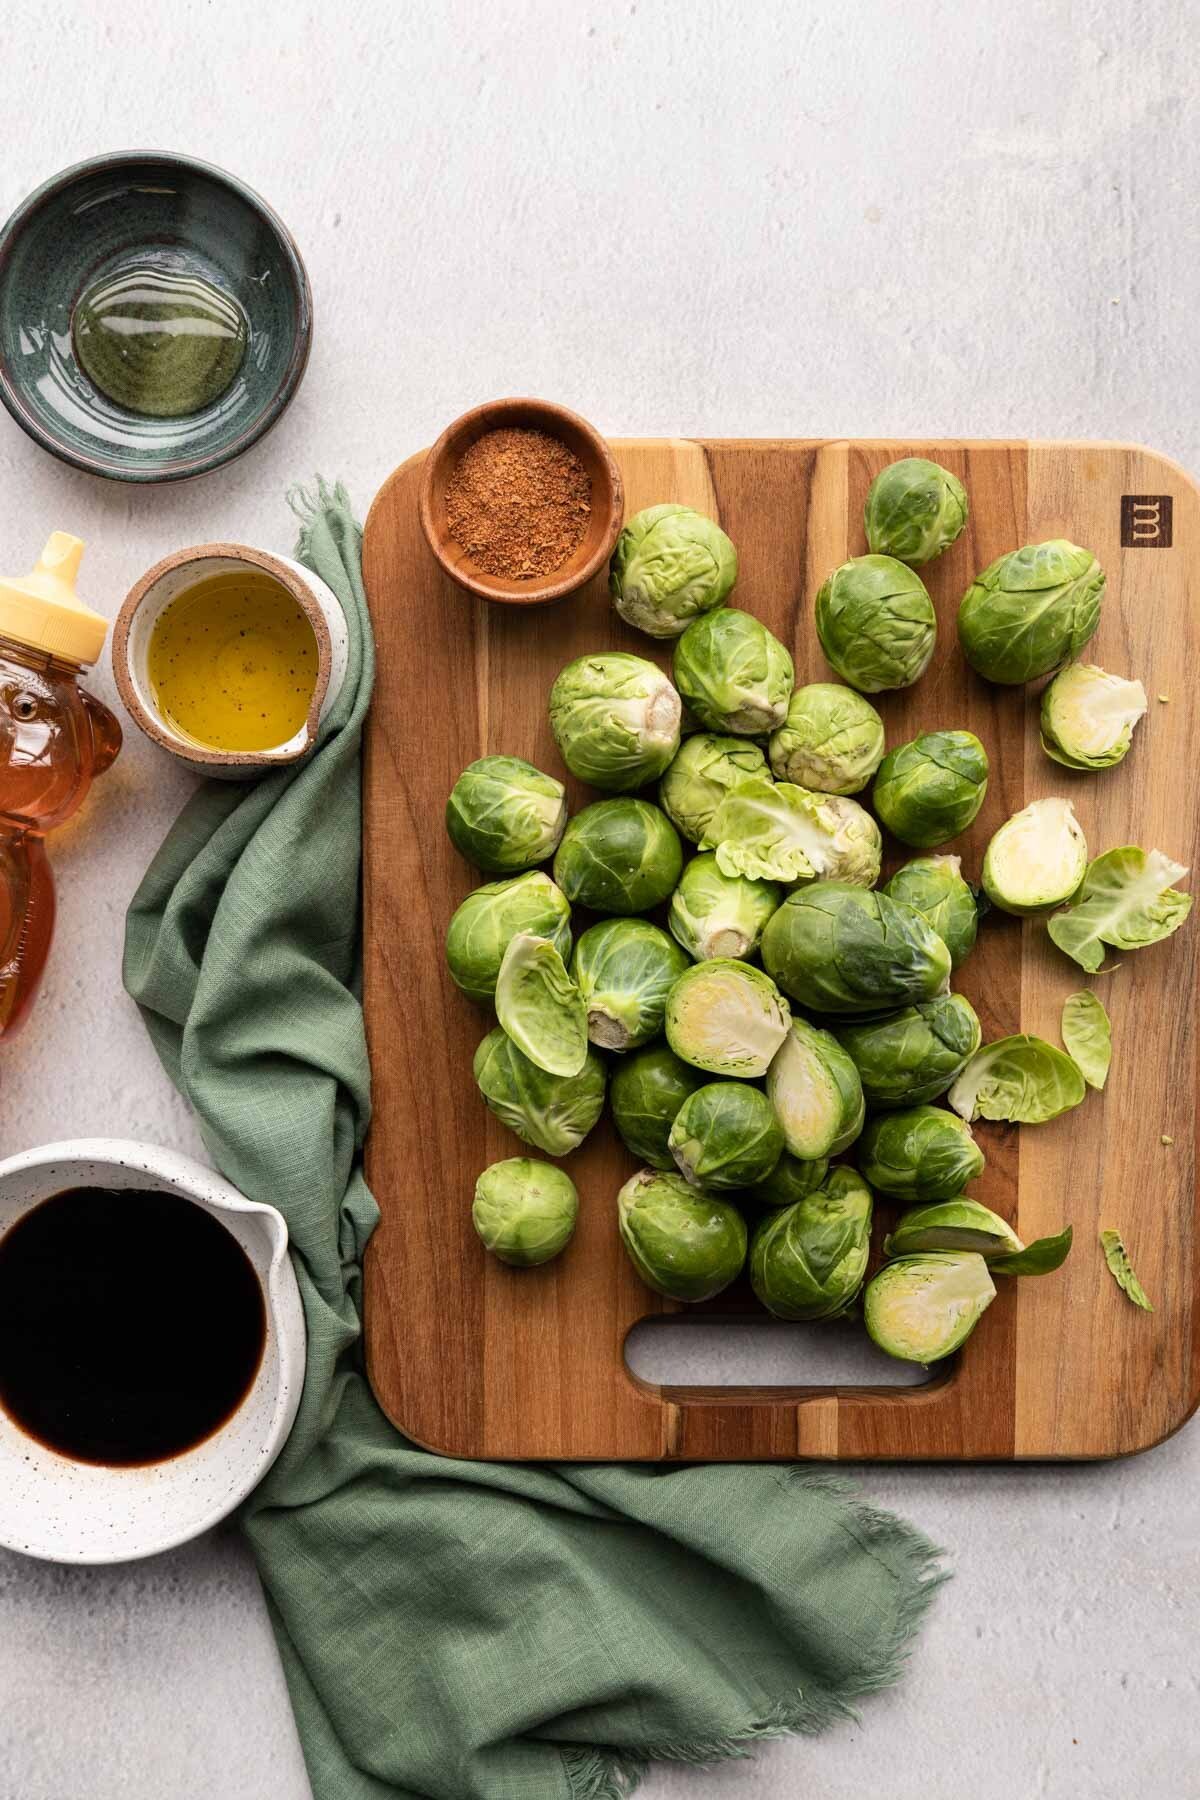 Ingredients for Crispy Baked Brussel sprouts